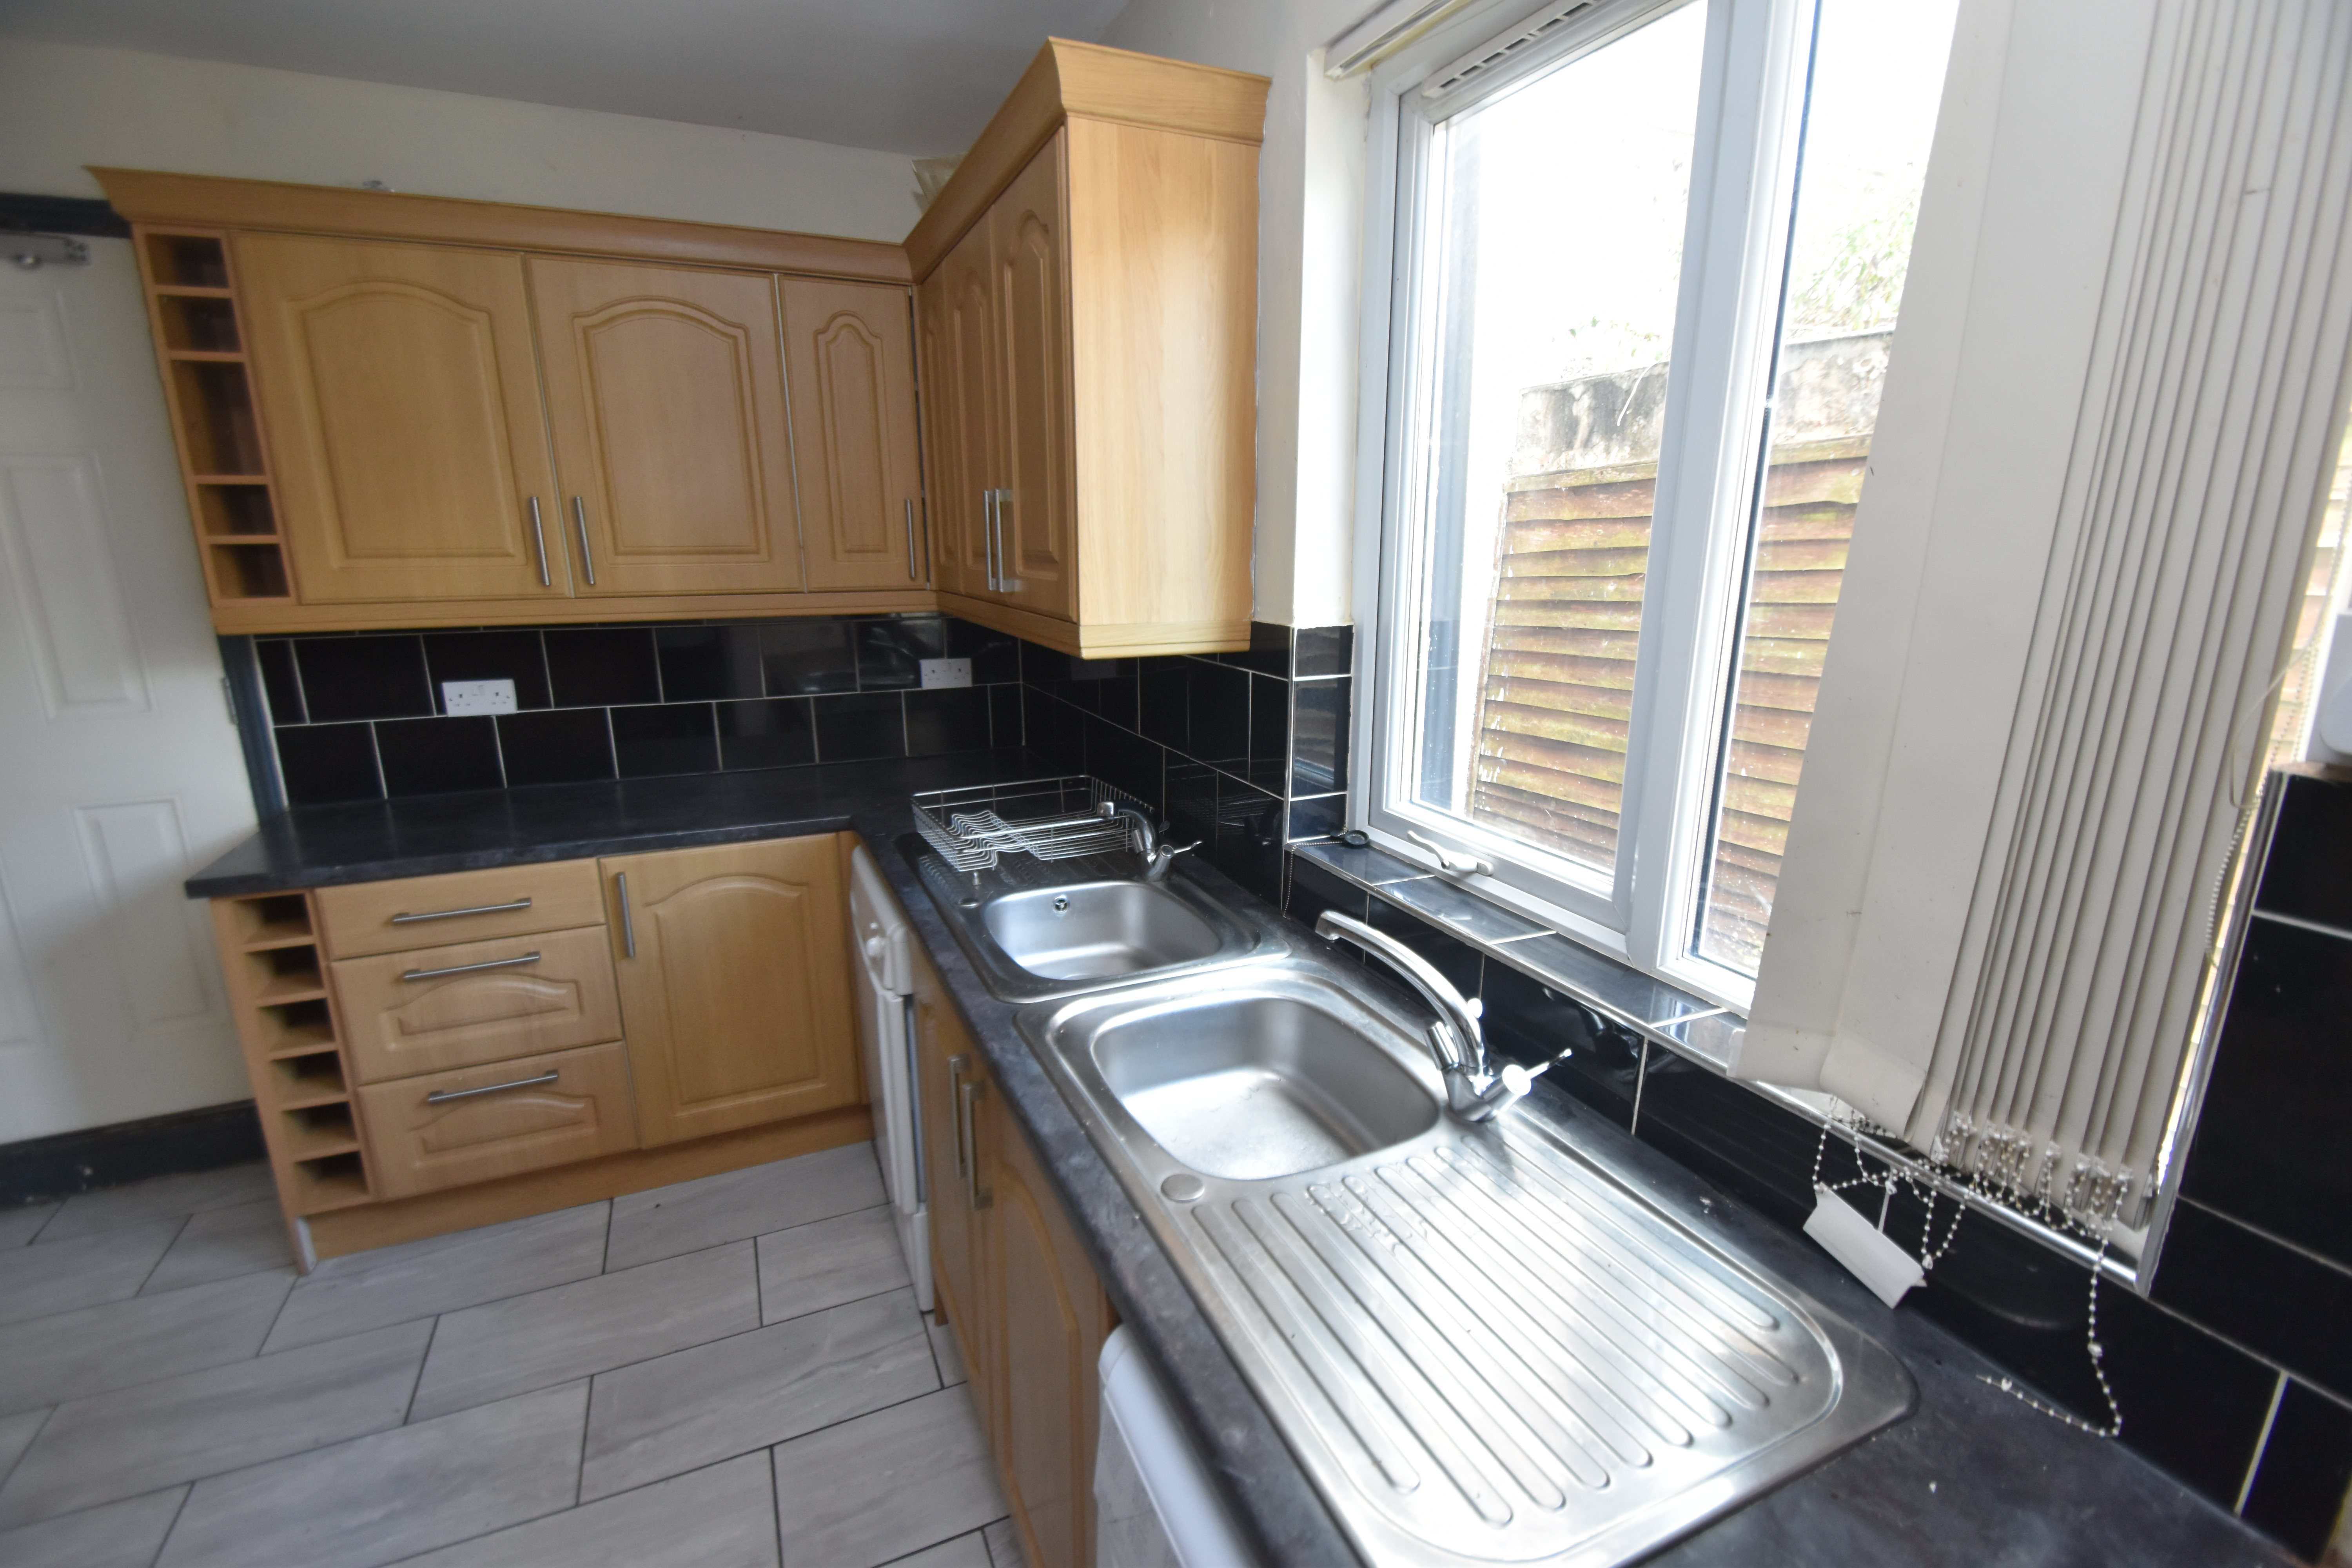 8 bed house to rent in Harriet Street, CATHAYS 30